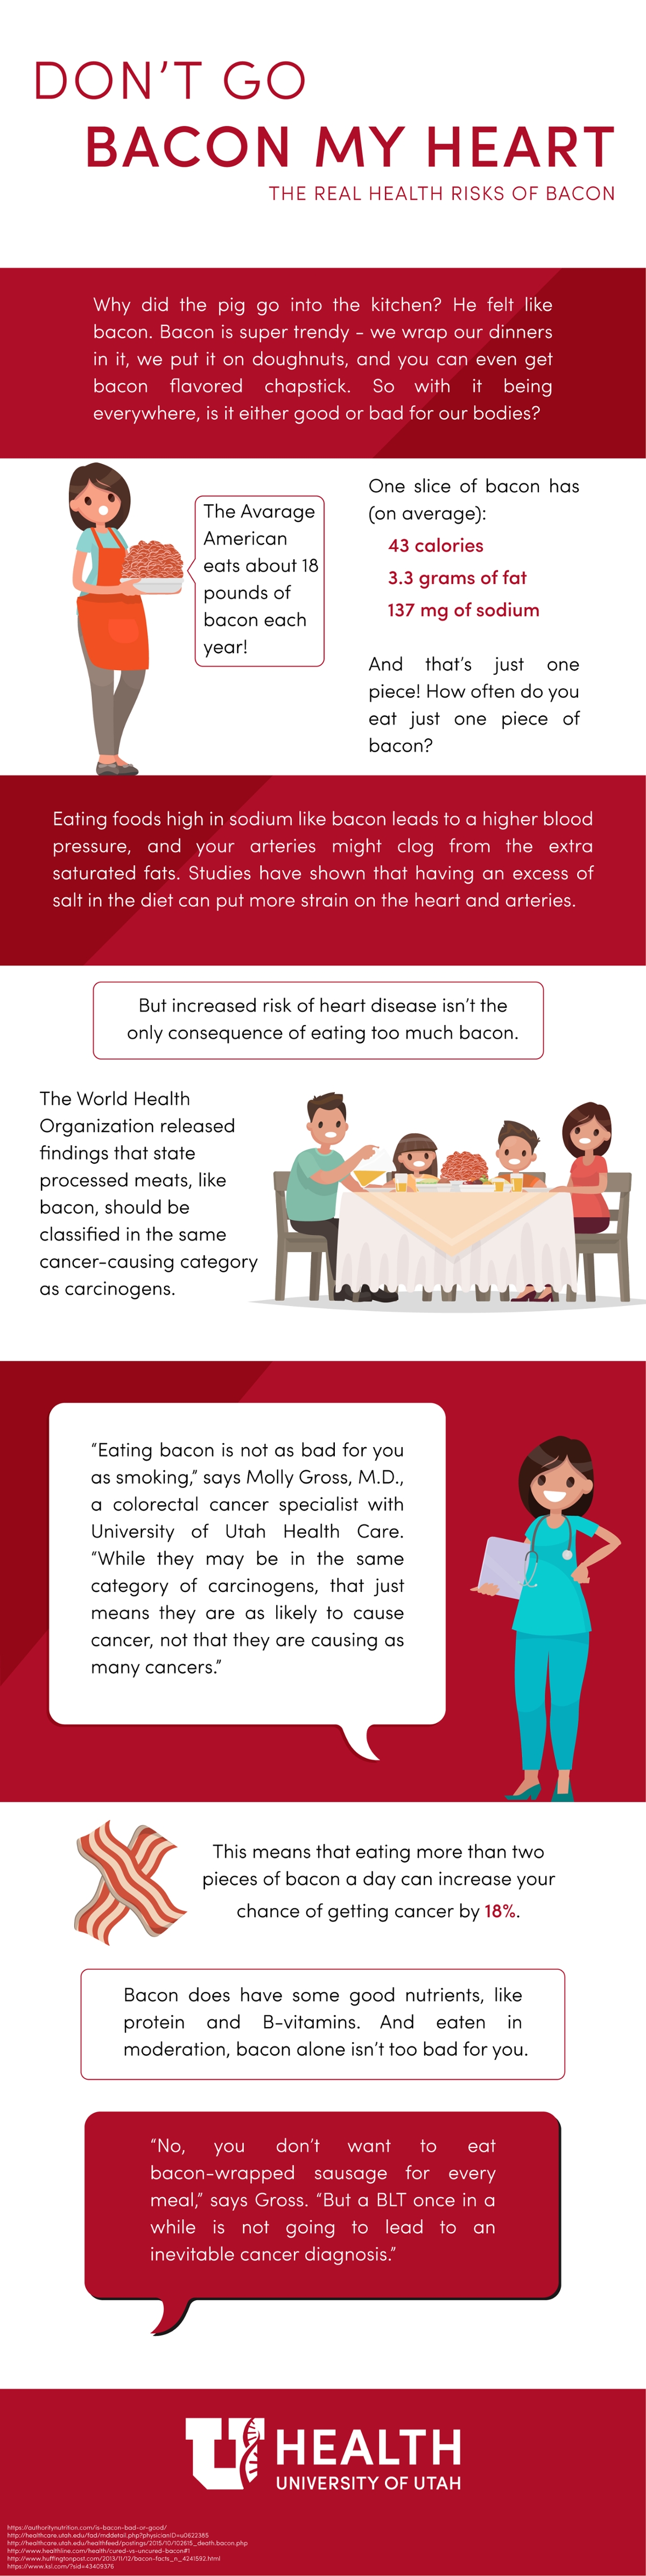 Bacon Health Risks Infographic